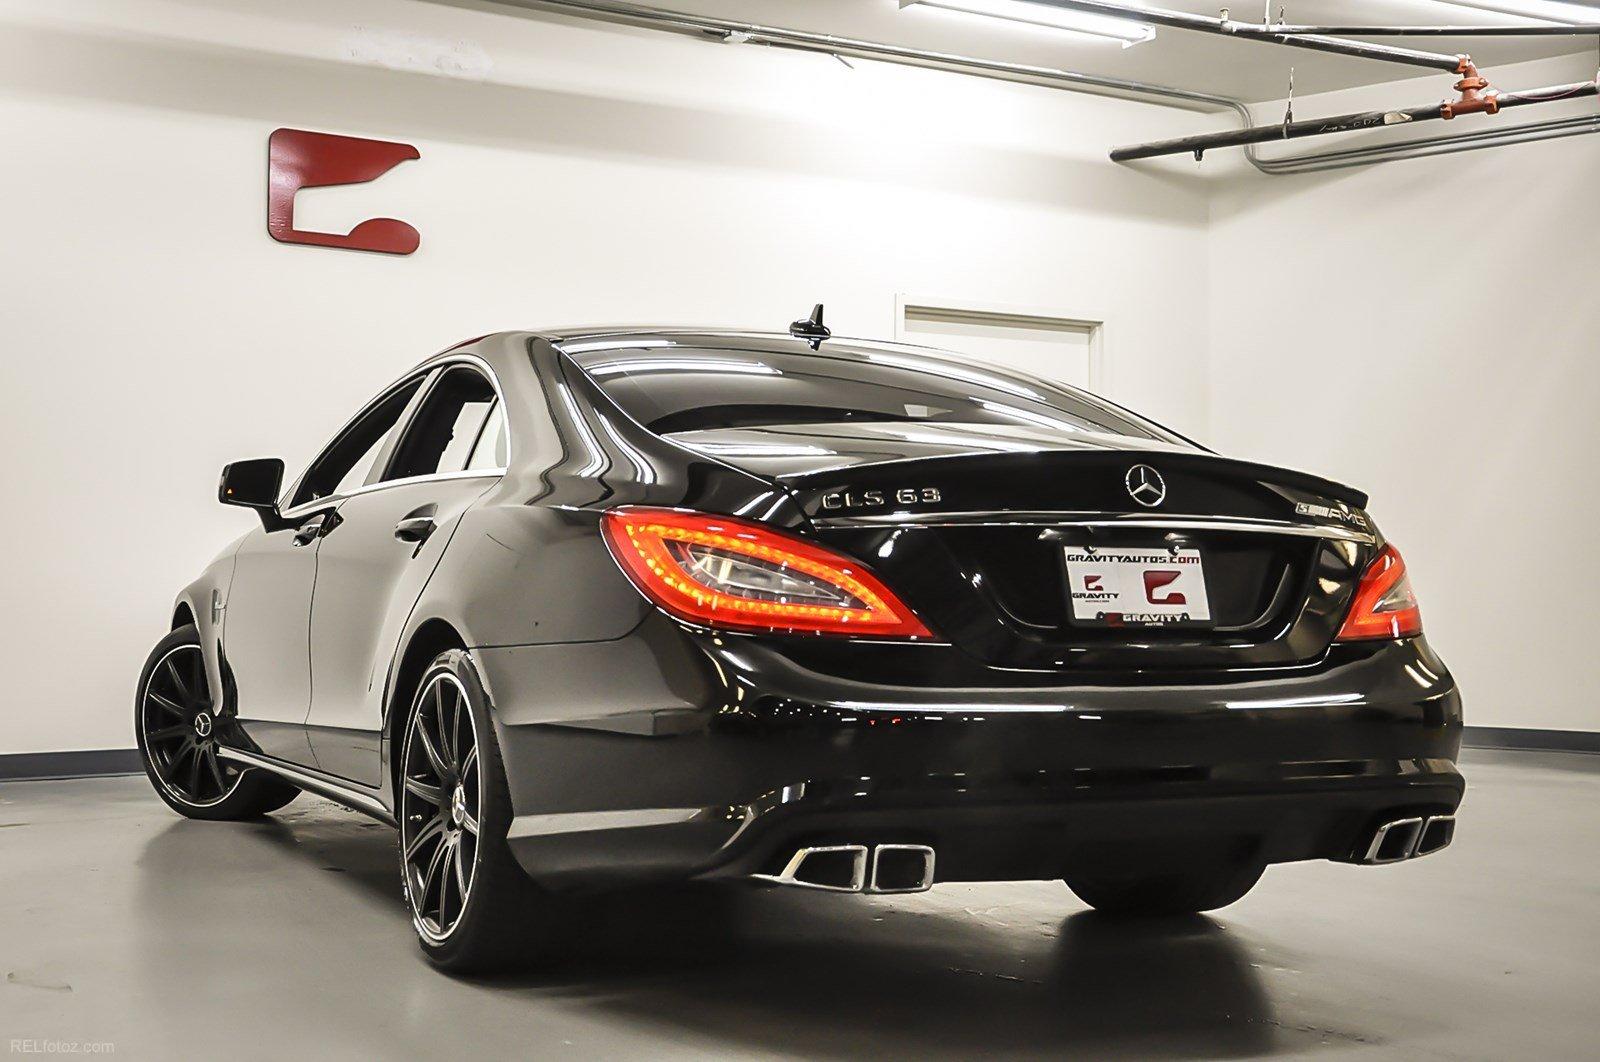 Used 14 Mercedes Benz Cls Class Cls 63 Amg S Model For Sale 53 999 Gravity Autos Marietta Stock 1234